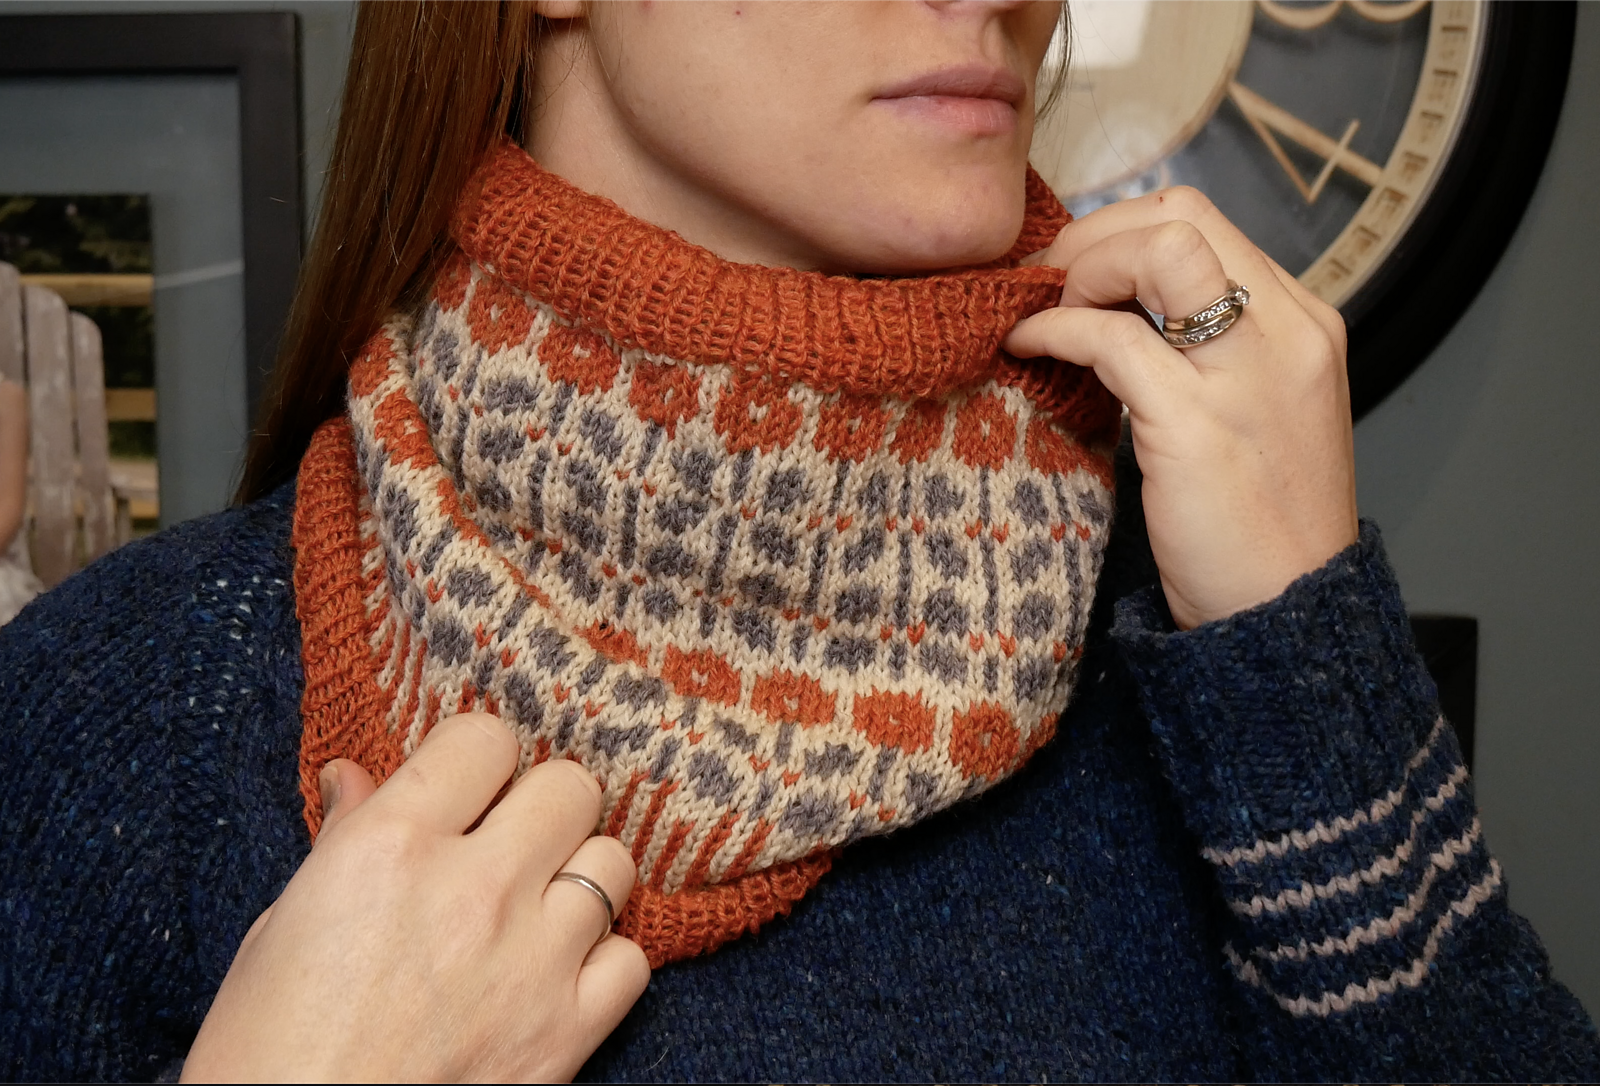 A knit colorwork cowl with orange flowers and green details